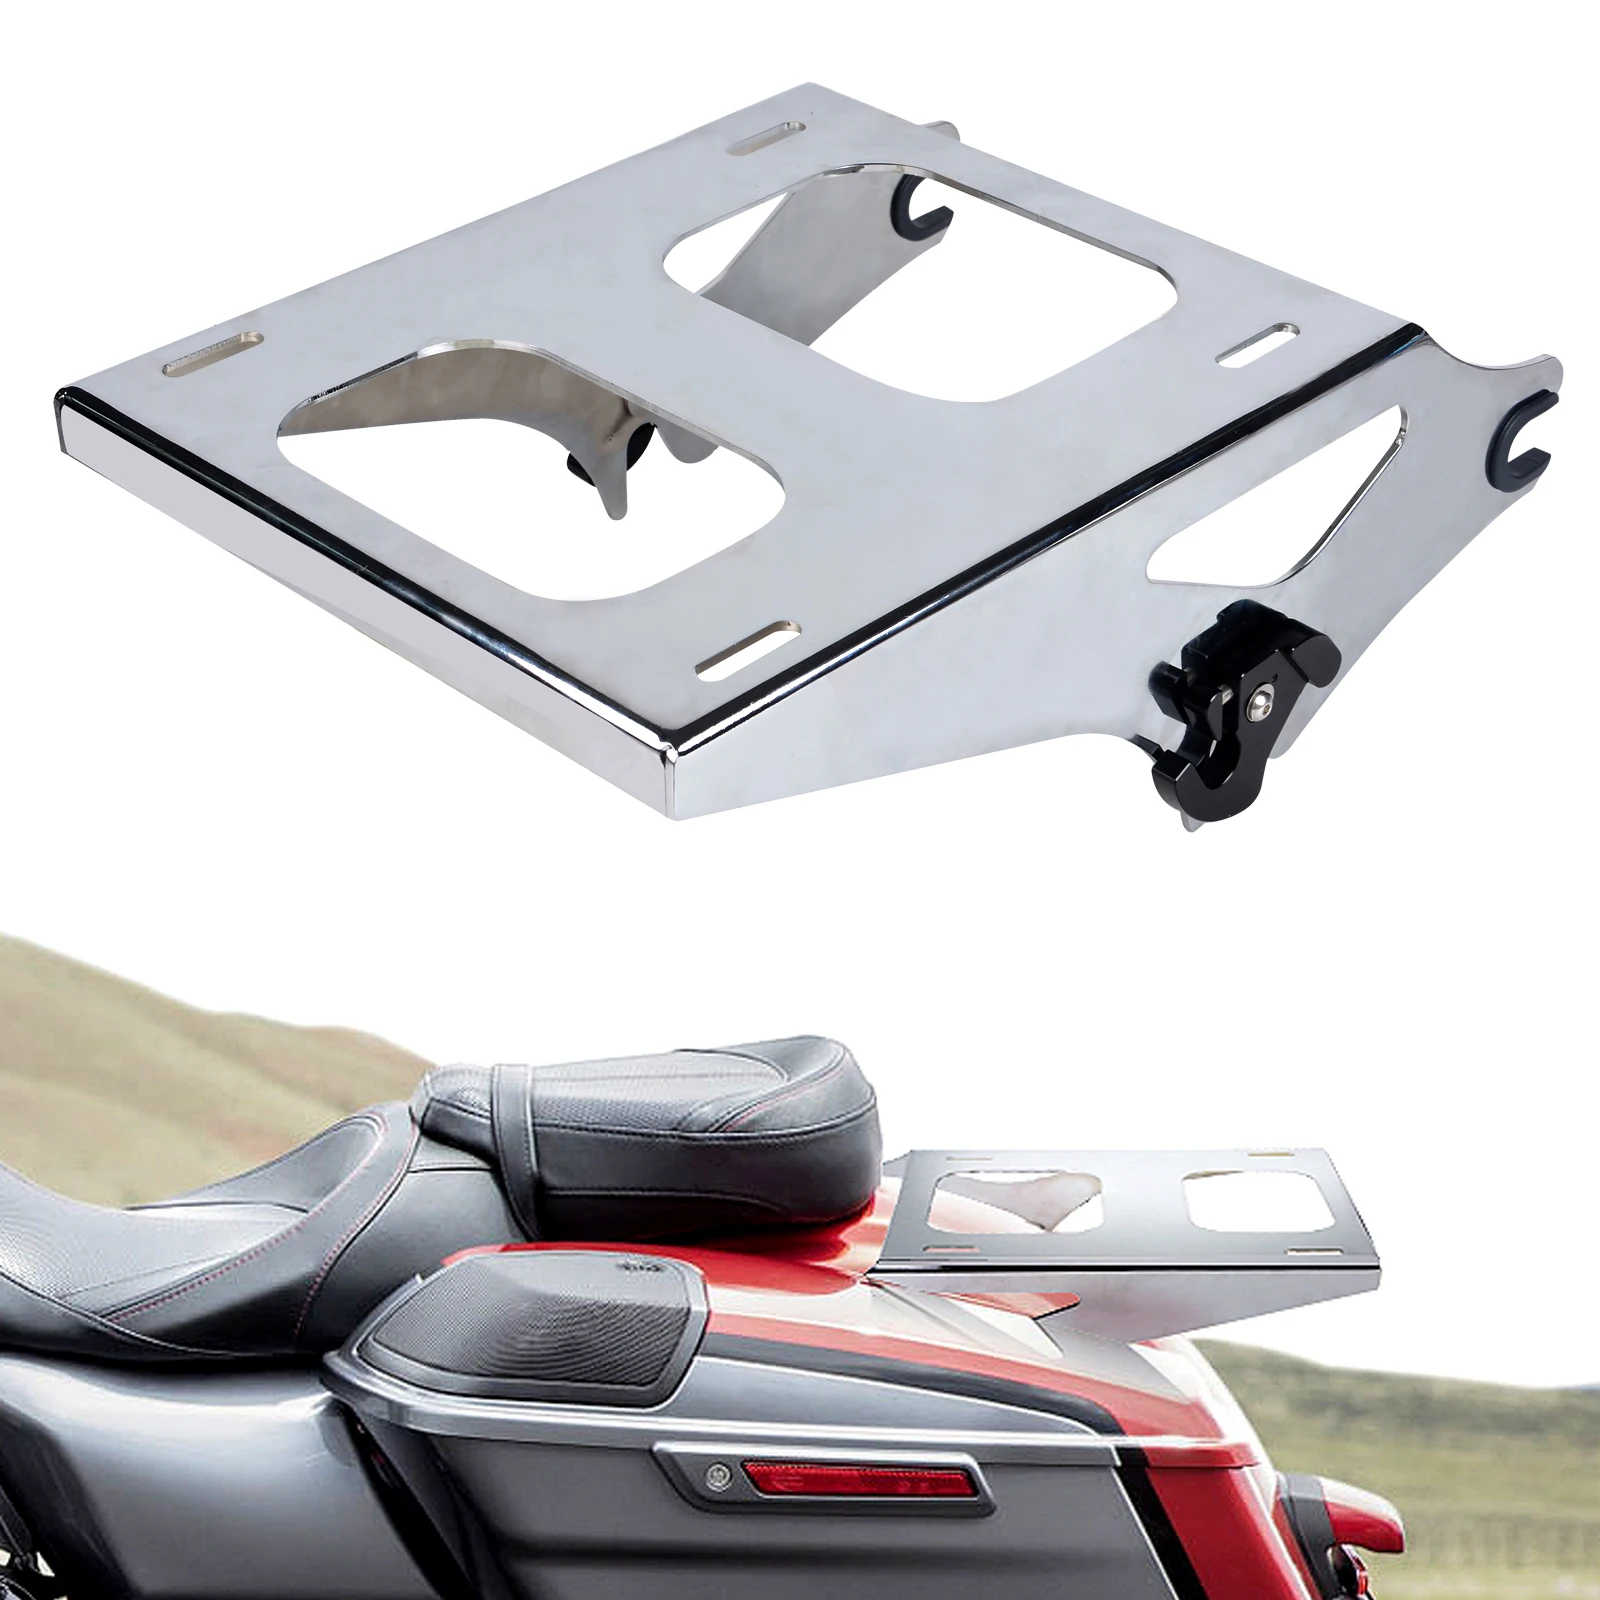 

Detachable Two 2 Up Tour Pak Pack Luggage Rack Mounting Bracket Rack Fits for Harley Touring Street Glide Road King 2014-2021